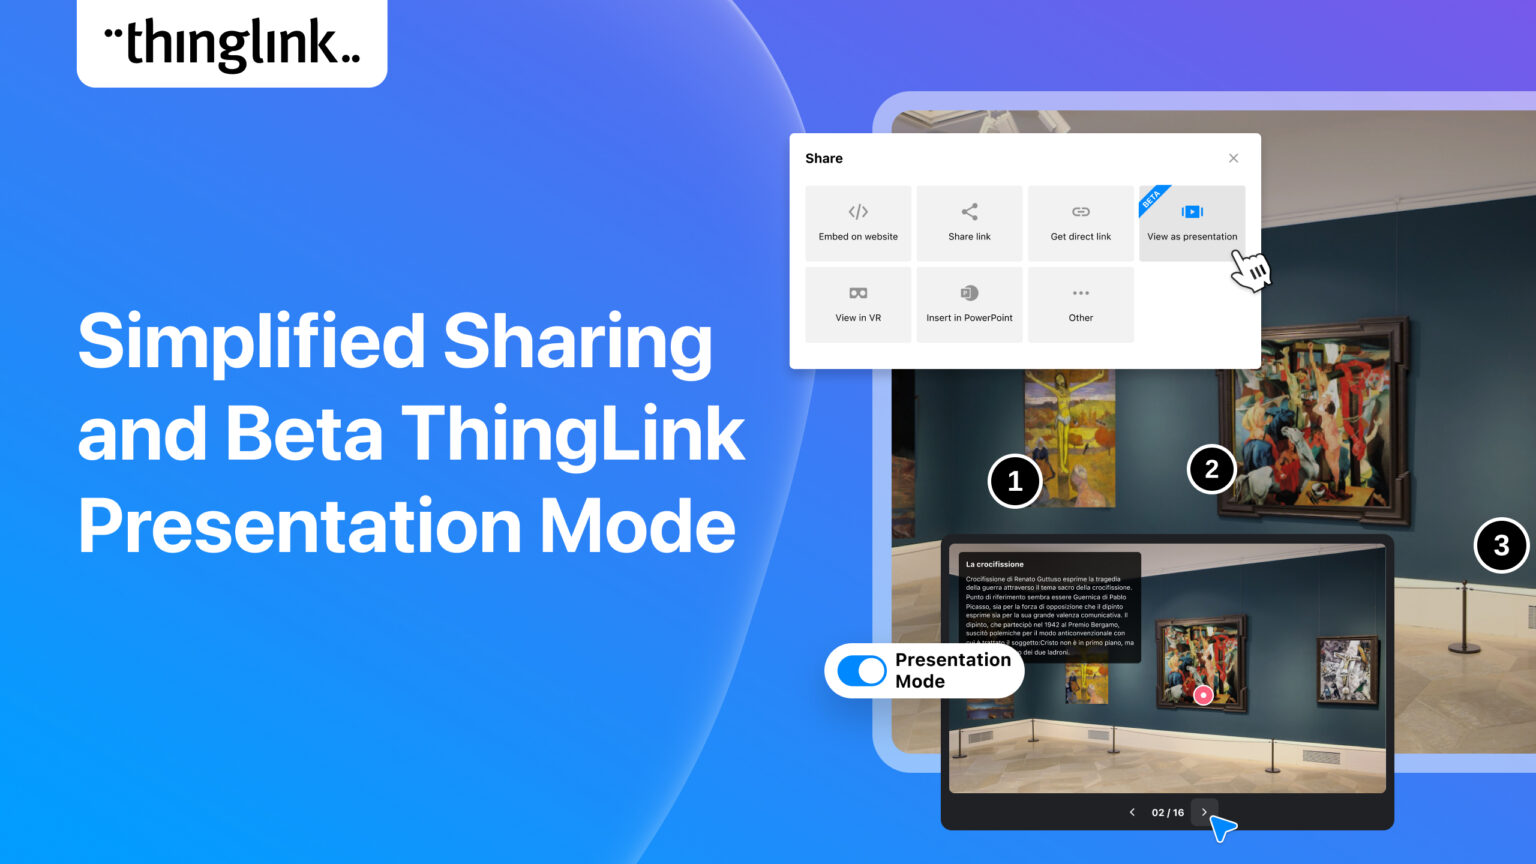 Simplified Sharing and Beta Presentation Mode